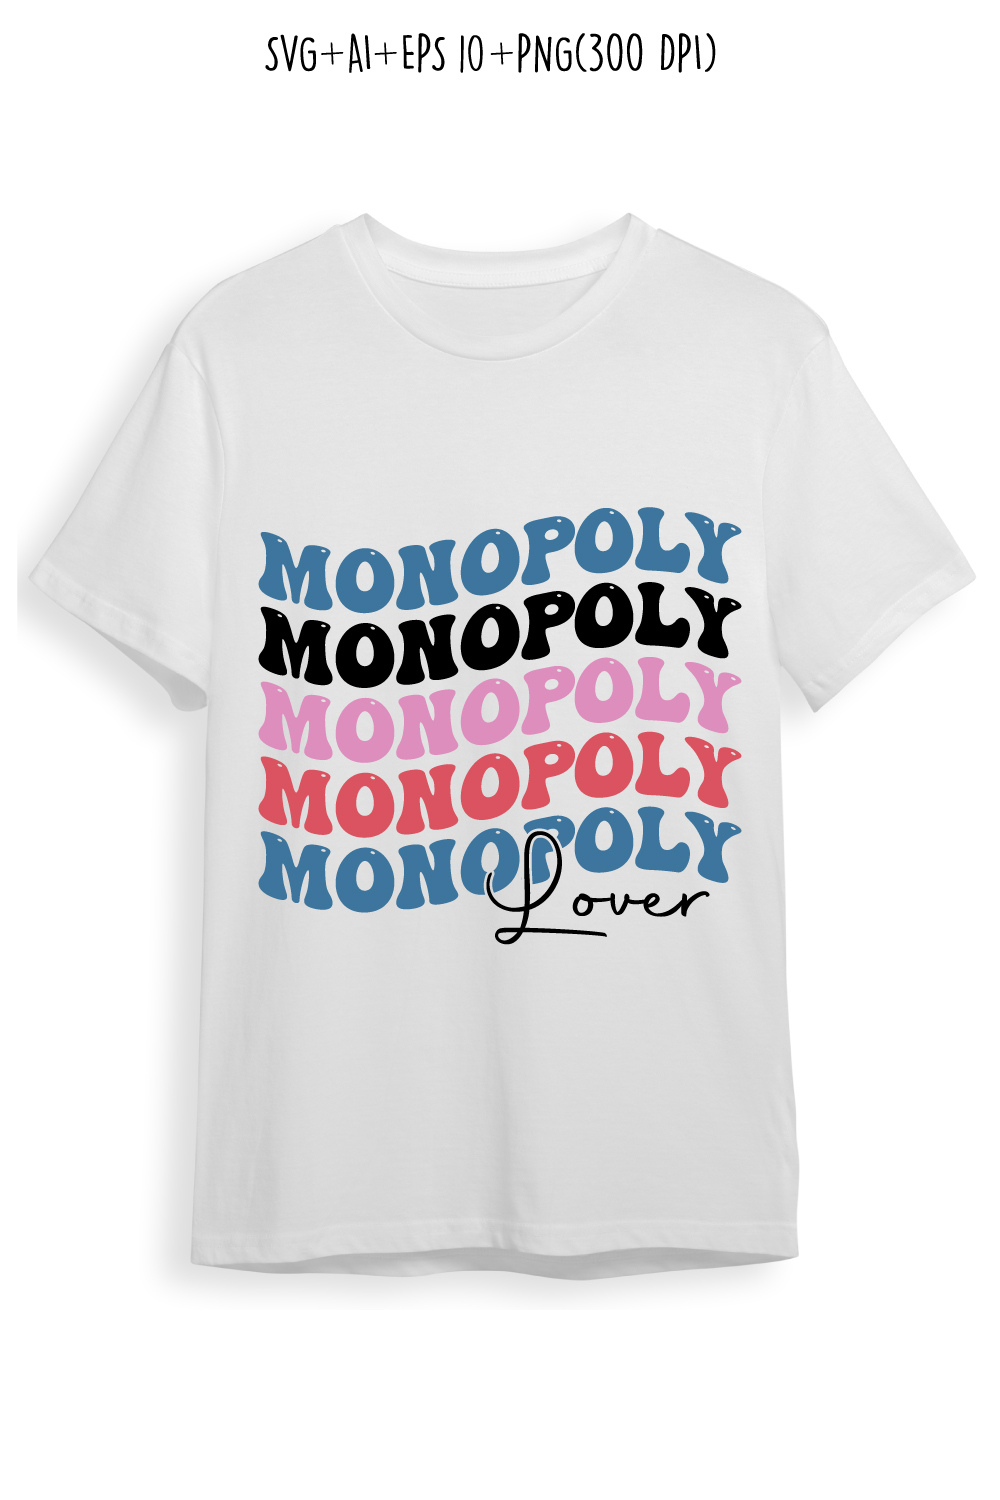 Monopoly lover indoor game retro typography design for t-shirts, cards, frame artwork, phone cases, bags, mugs, stickers, tumblers, print, etc pinterest preview image.